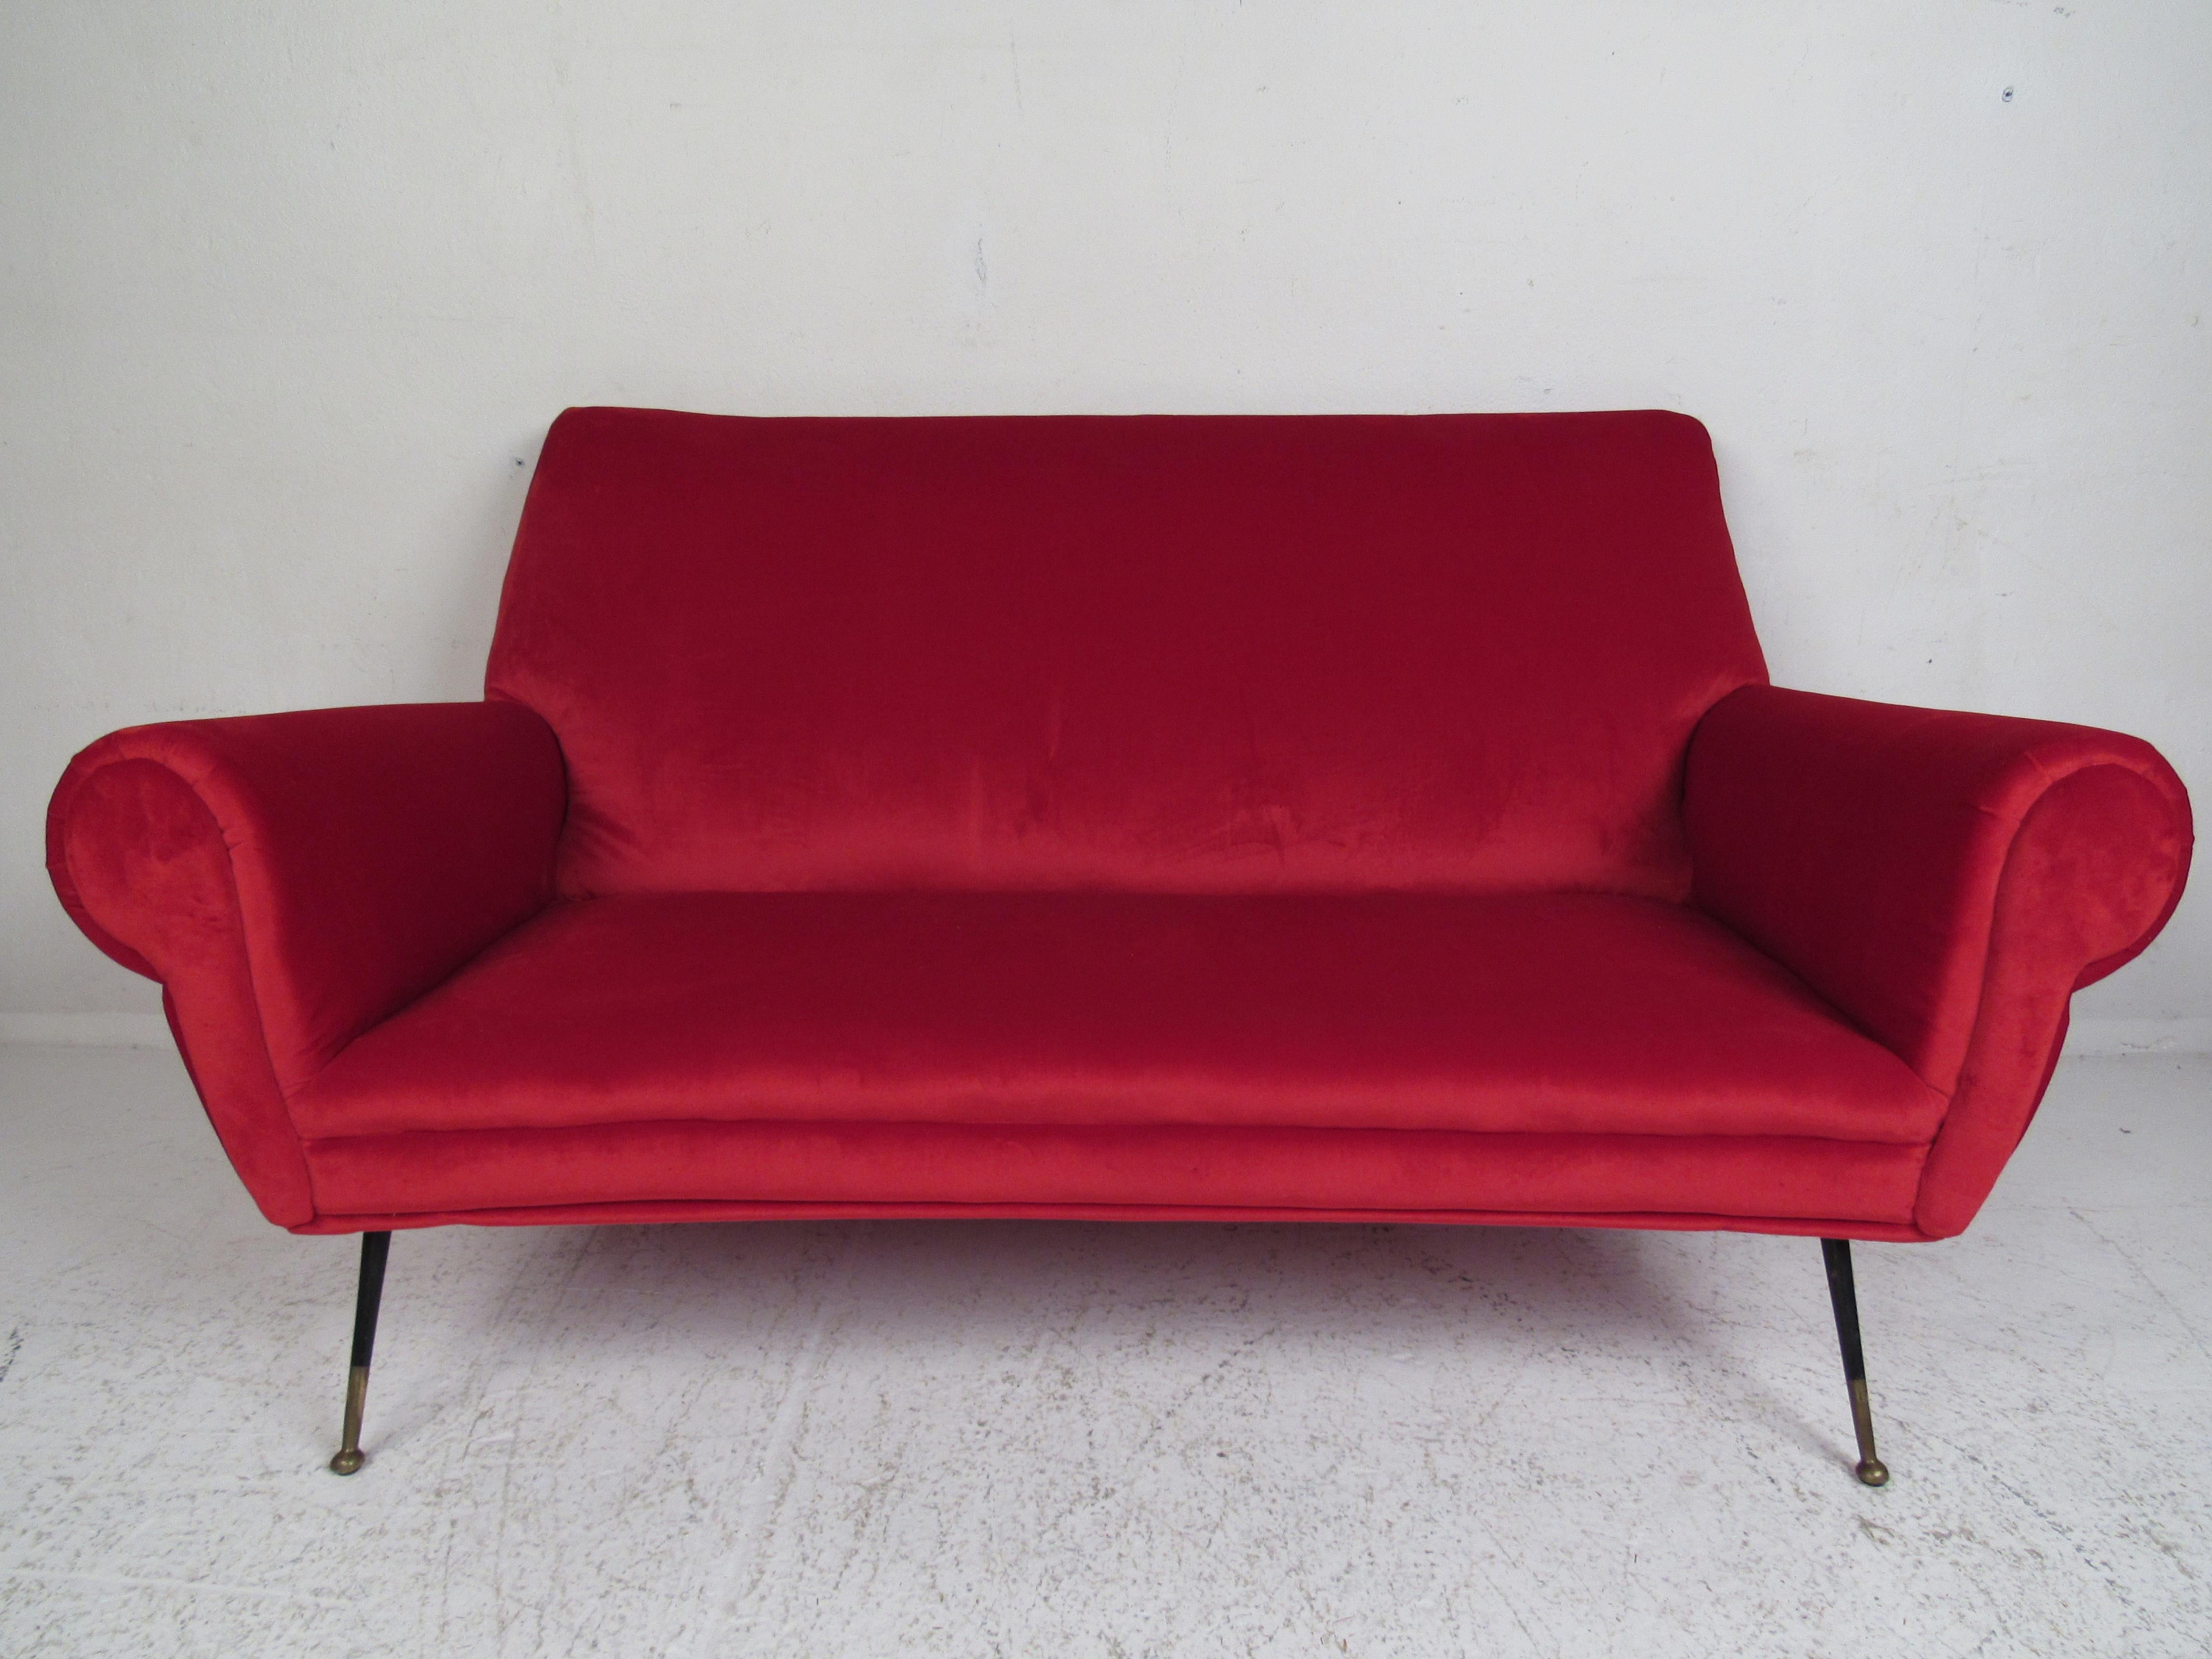 This stunning vintage modern Italian settee features ruby red velvet fabric and splayed metal legs with brass feet. The plush upholstery and thick padded seating ensure maximum comfort in any modern interior. Please confirm item location (NY or NJ).